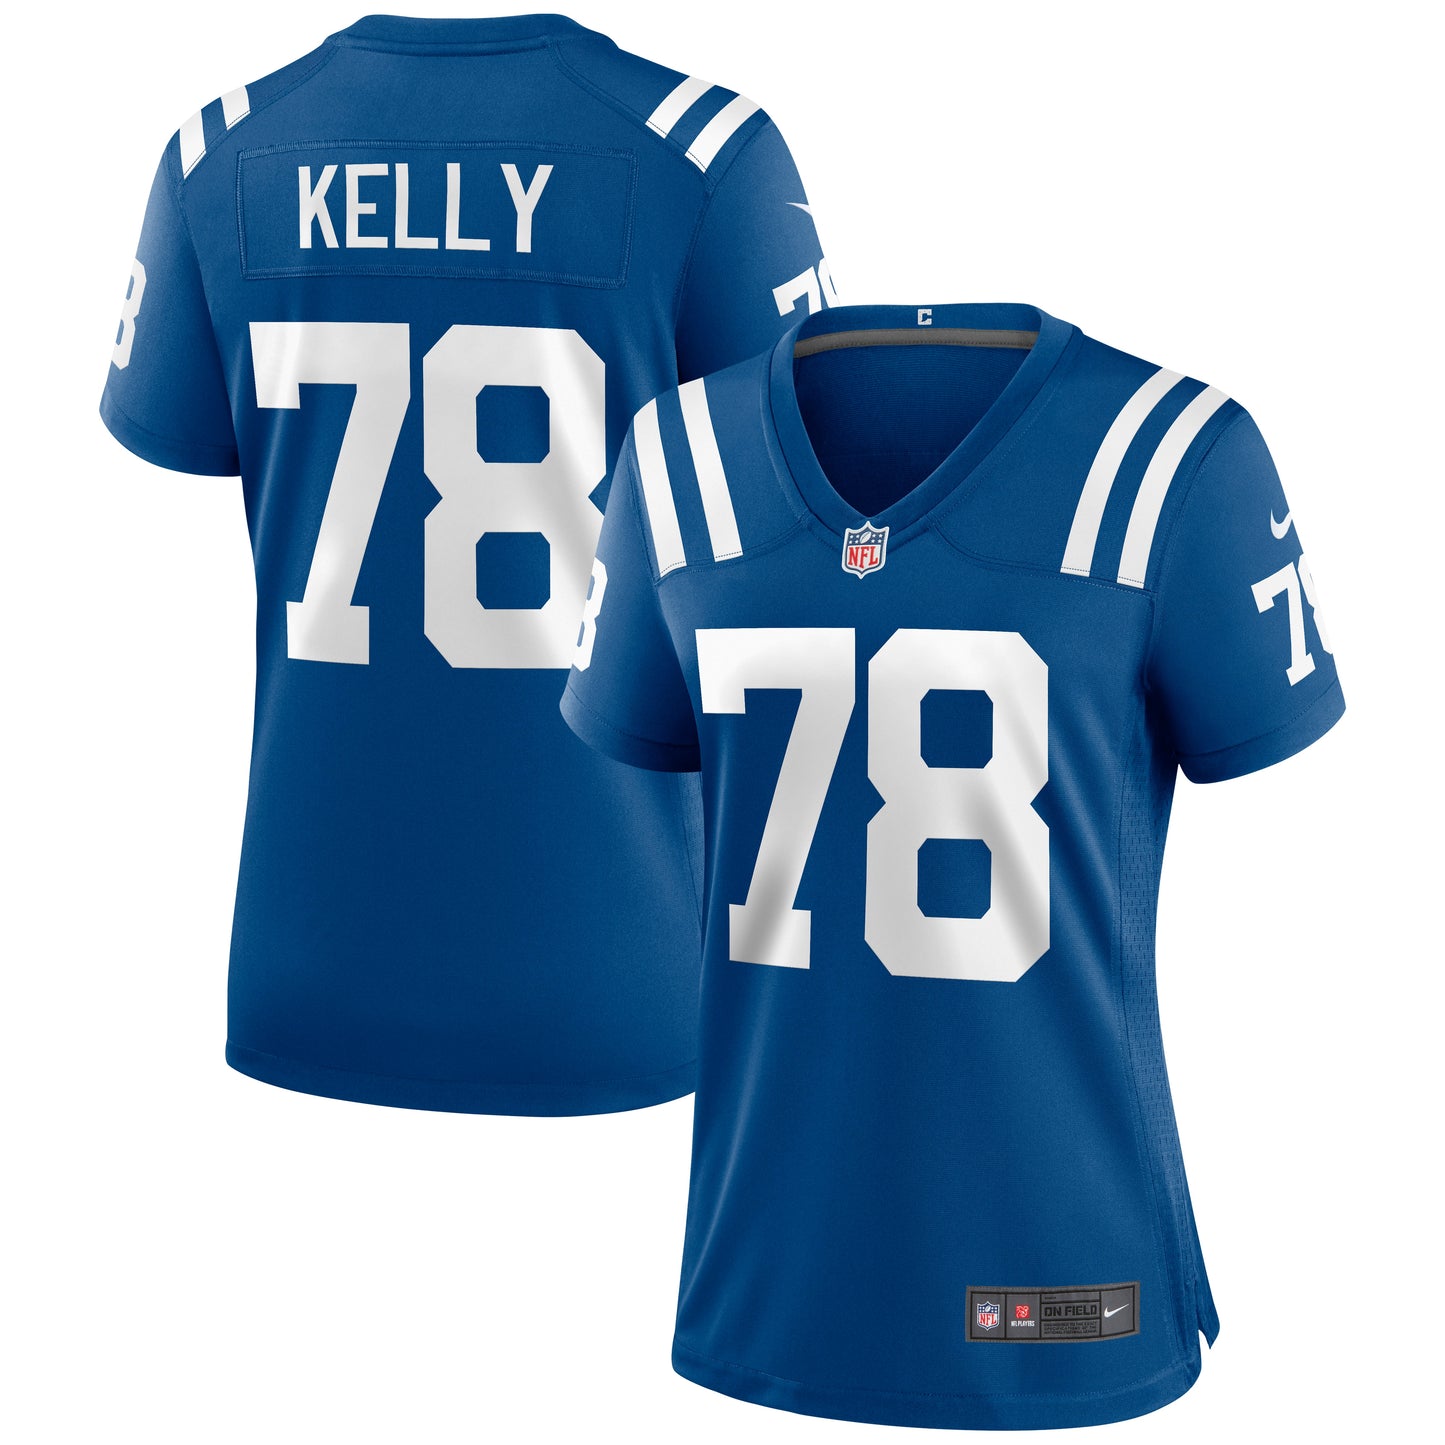 Ryan Kelly Indianapolis Colts Nike Women's Game Jersey - Royal